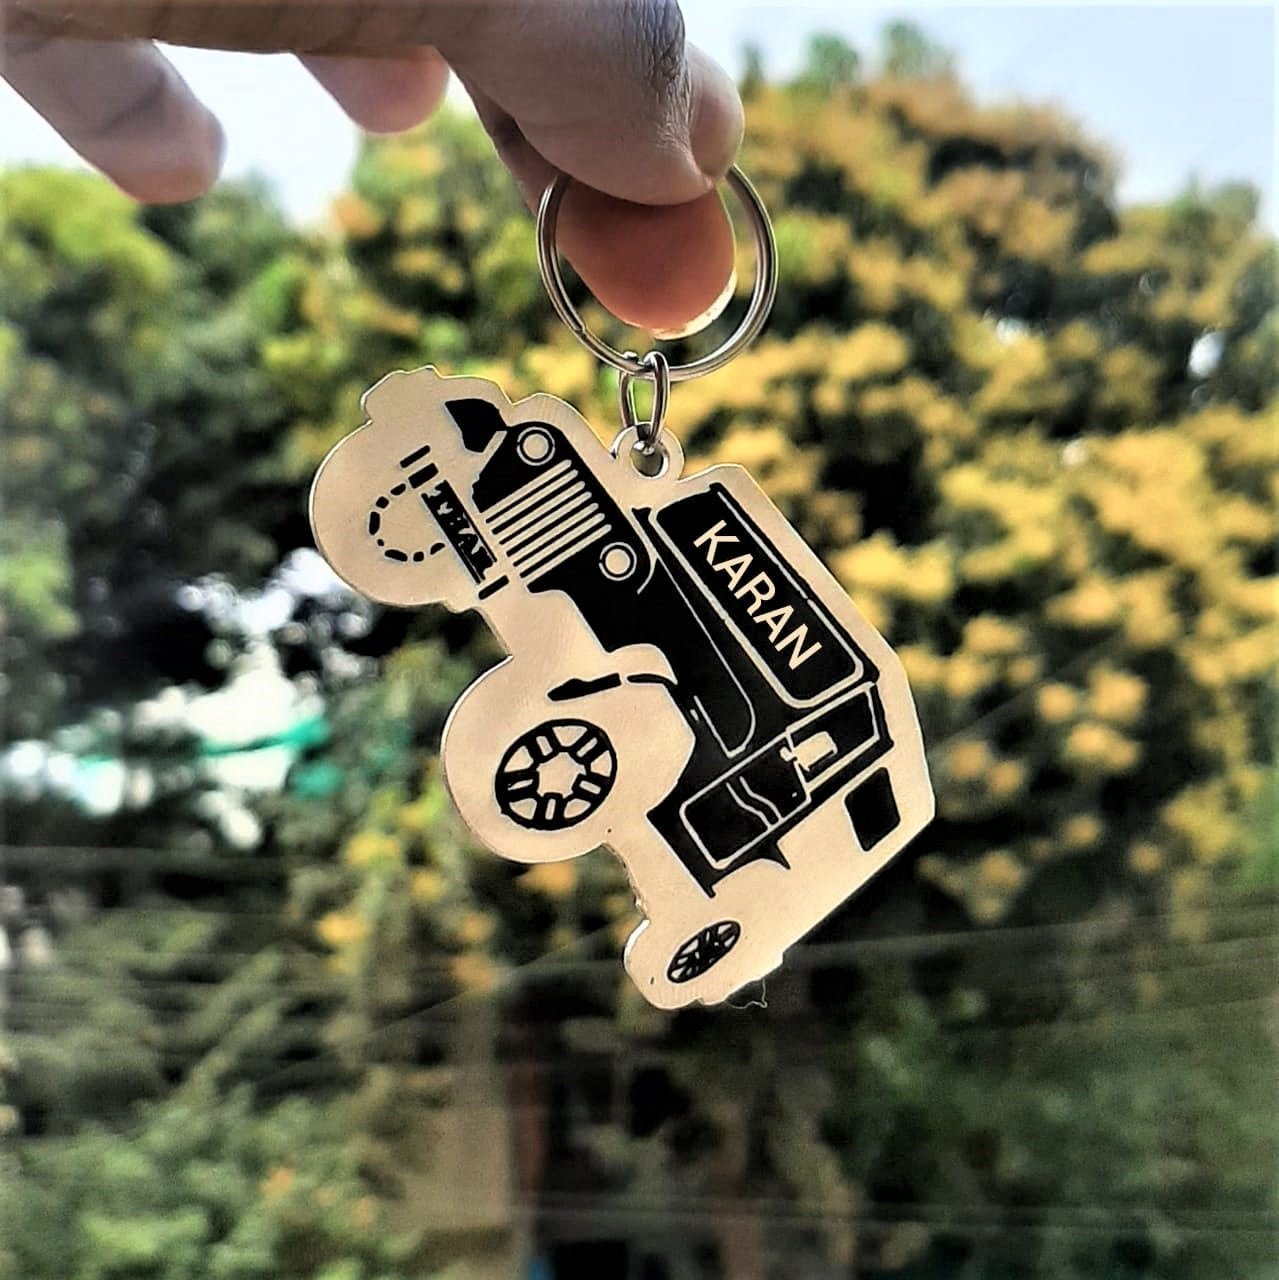 https://vivagifts.in/wp-content/uploads/2022/03/Customized-Car-Keychain-Thar-Keychain.jpeg